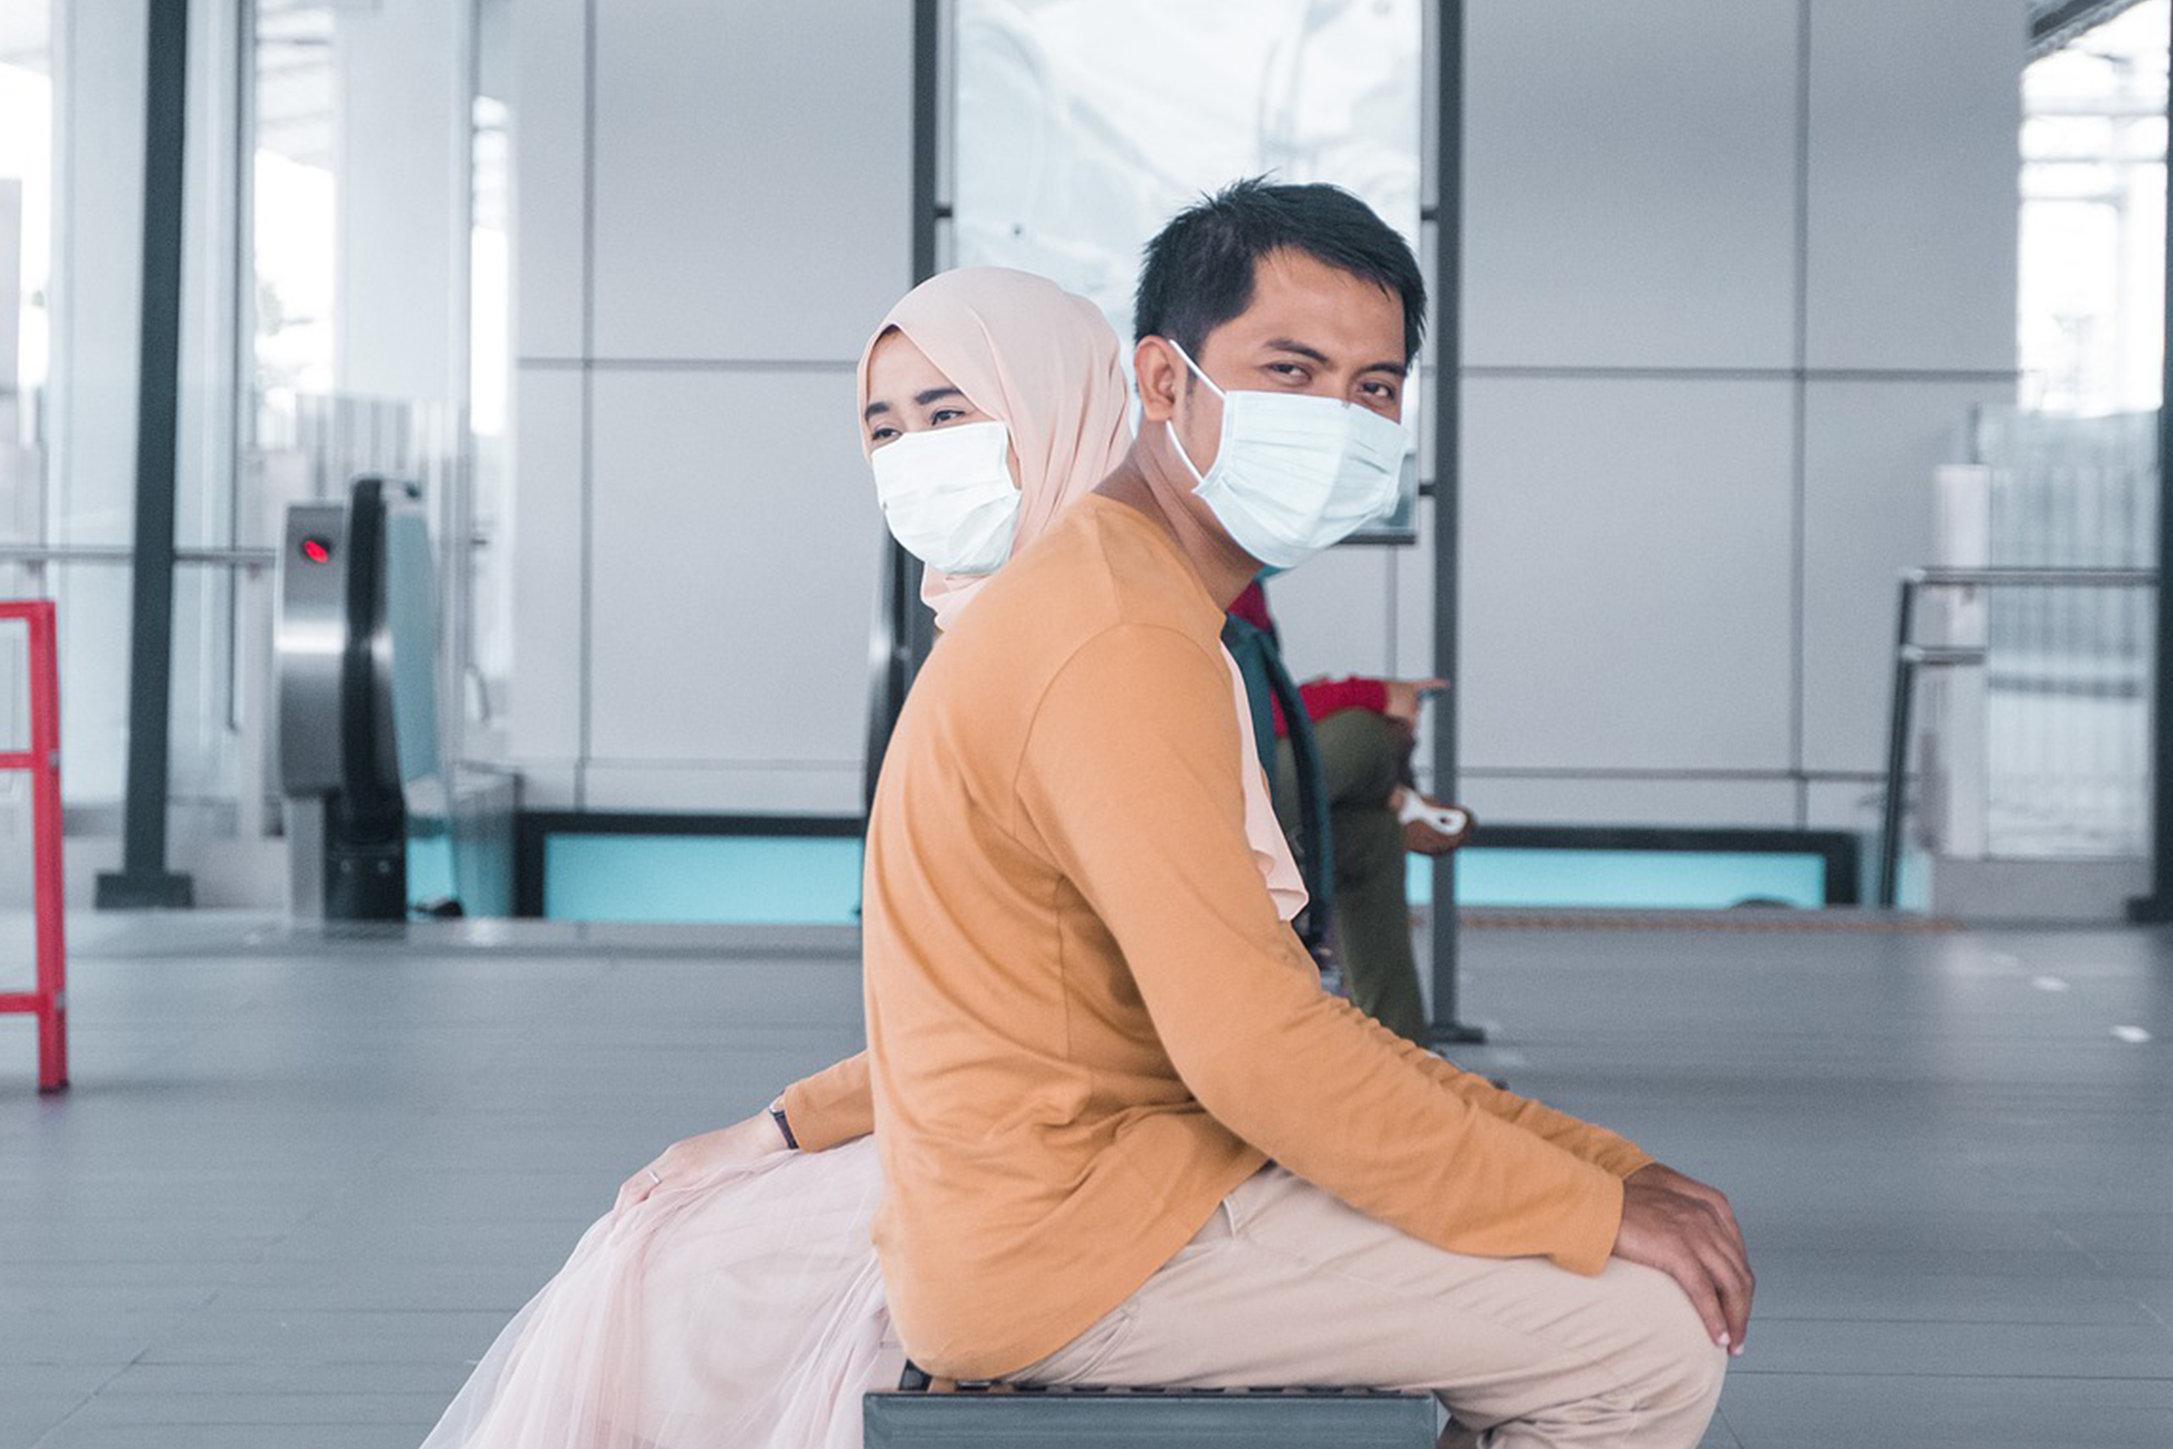 Two people sitting together but facing opposite and wearing face masks